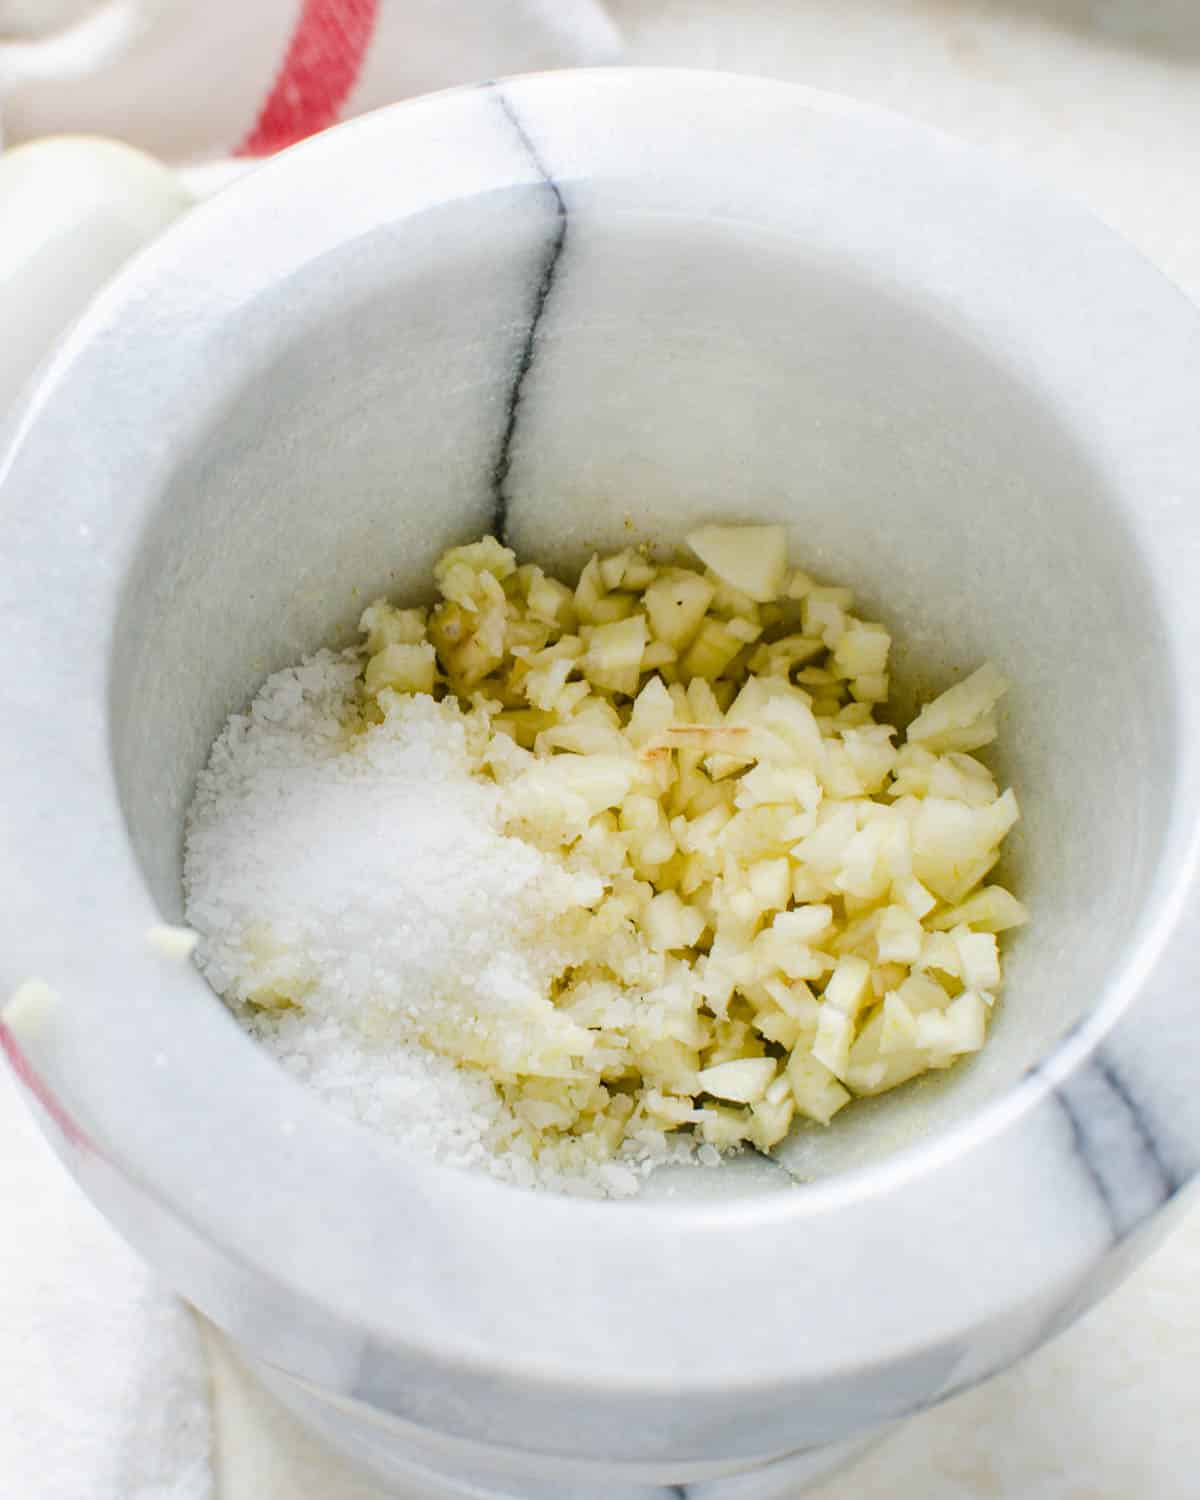 Grinding garlic and kosher salt in a mortar and pestle.